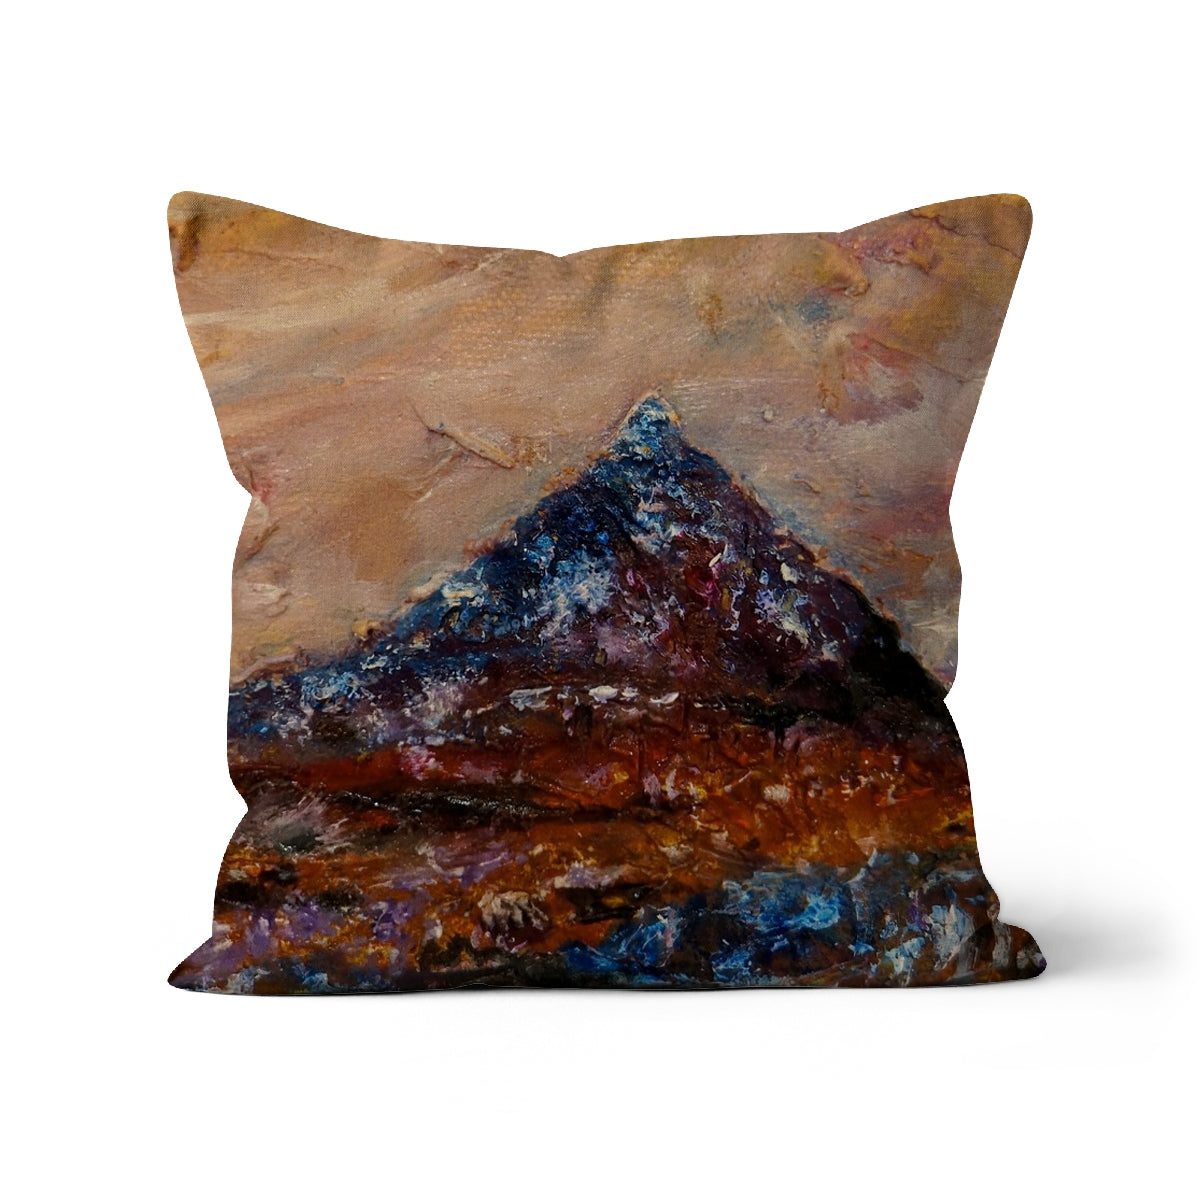 Buachaille Etive Mòr Art Gifts Cushion-Cushions-Glencoe Art Gallery-Faux Suede-16"x16"-Paintings, Prints, Homeware, Art Gifts From Scotland By Scottish Artist Kevin Hunter